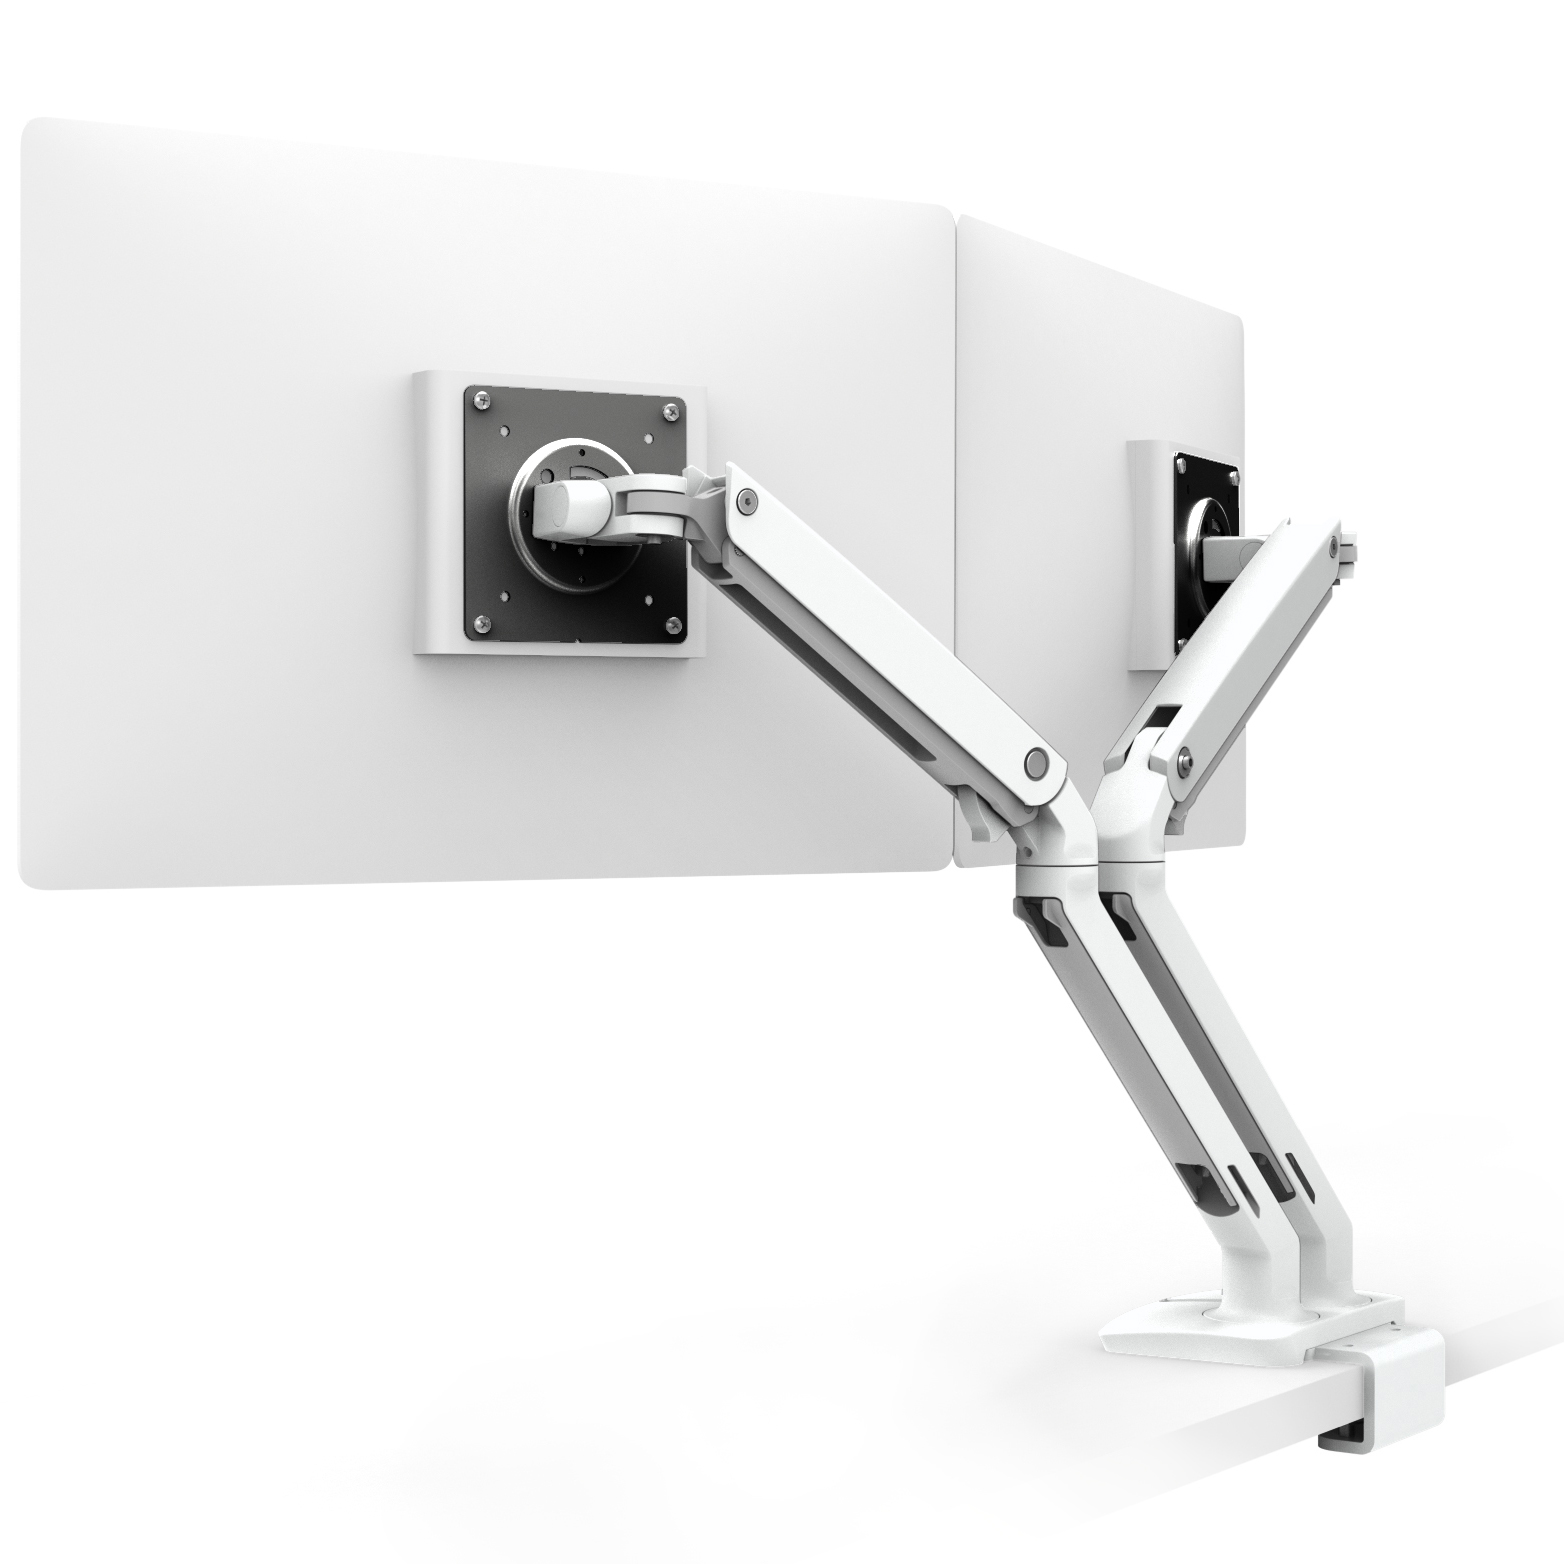 MXV Desk Dual Monitor Arm, Under Mount C-Clamp